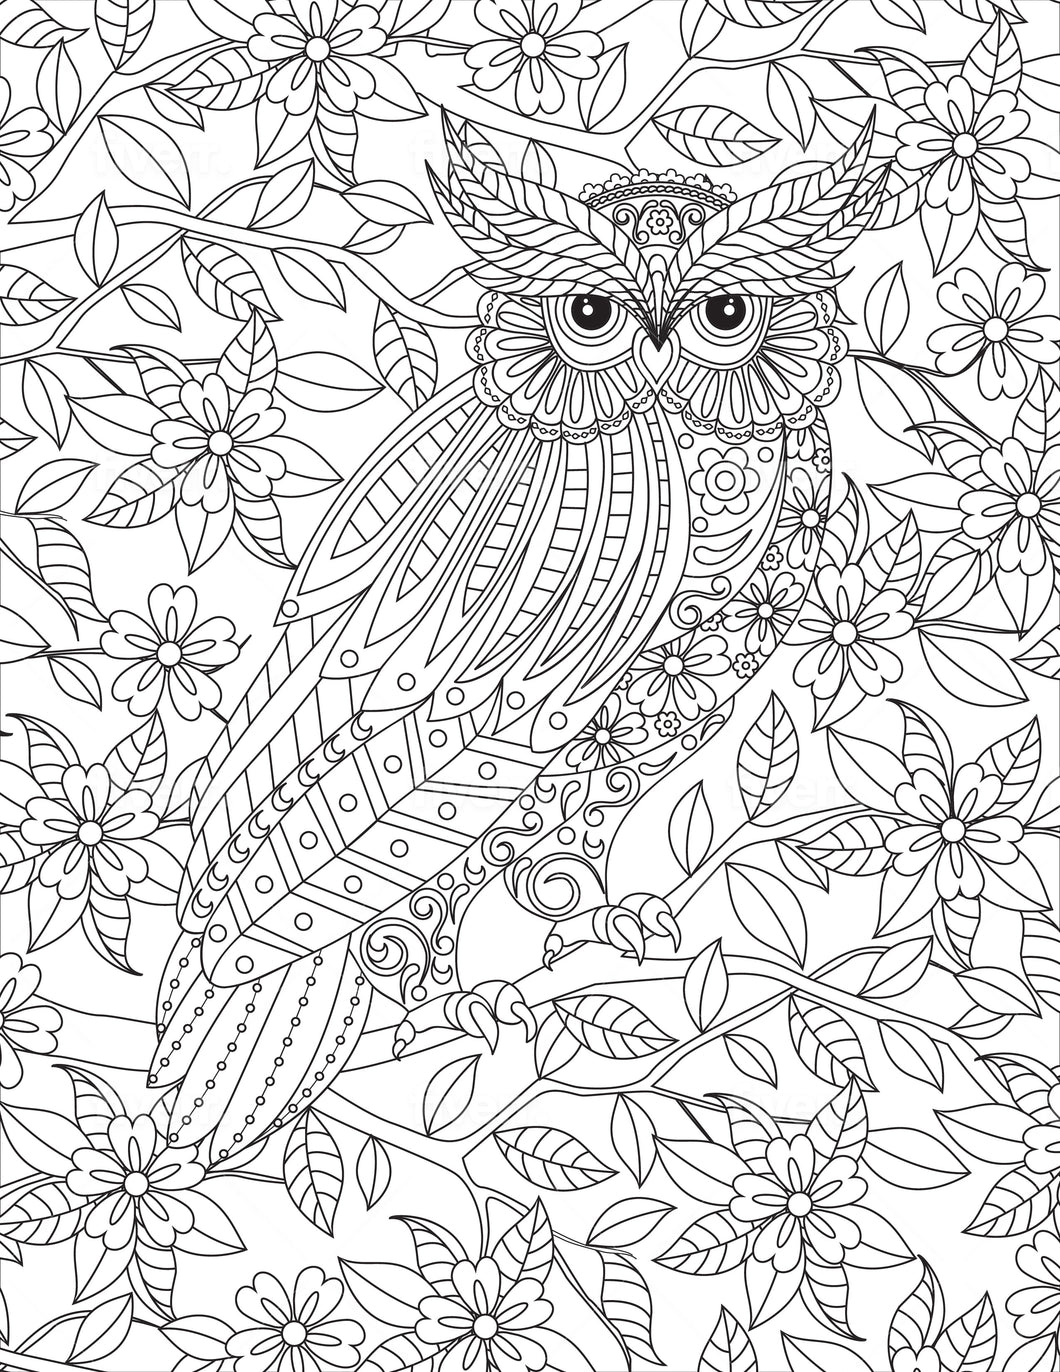 Owl #1 Coloring Sheet - Goin Postal Brentwood